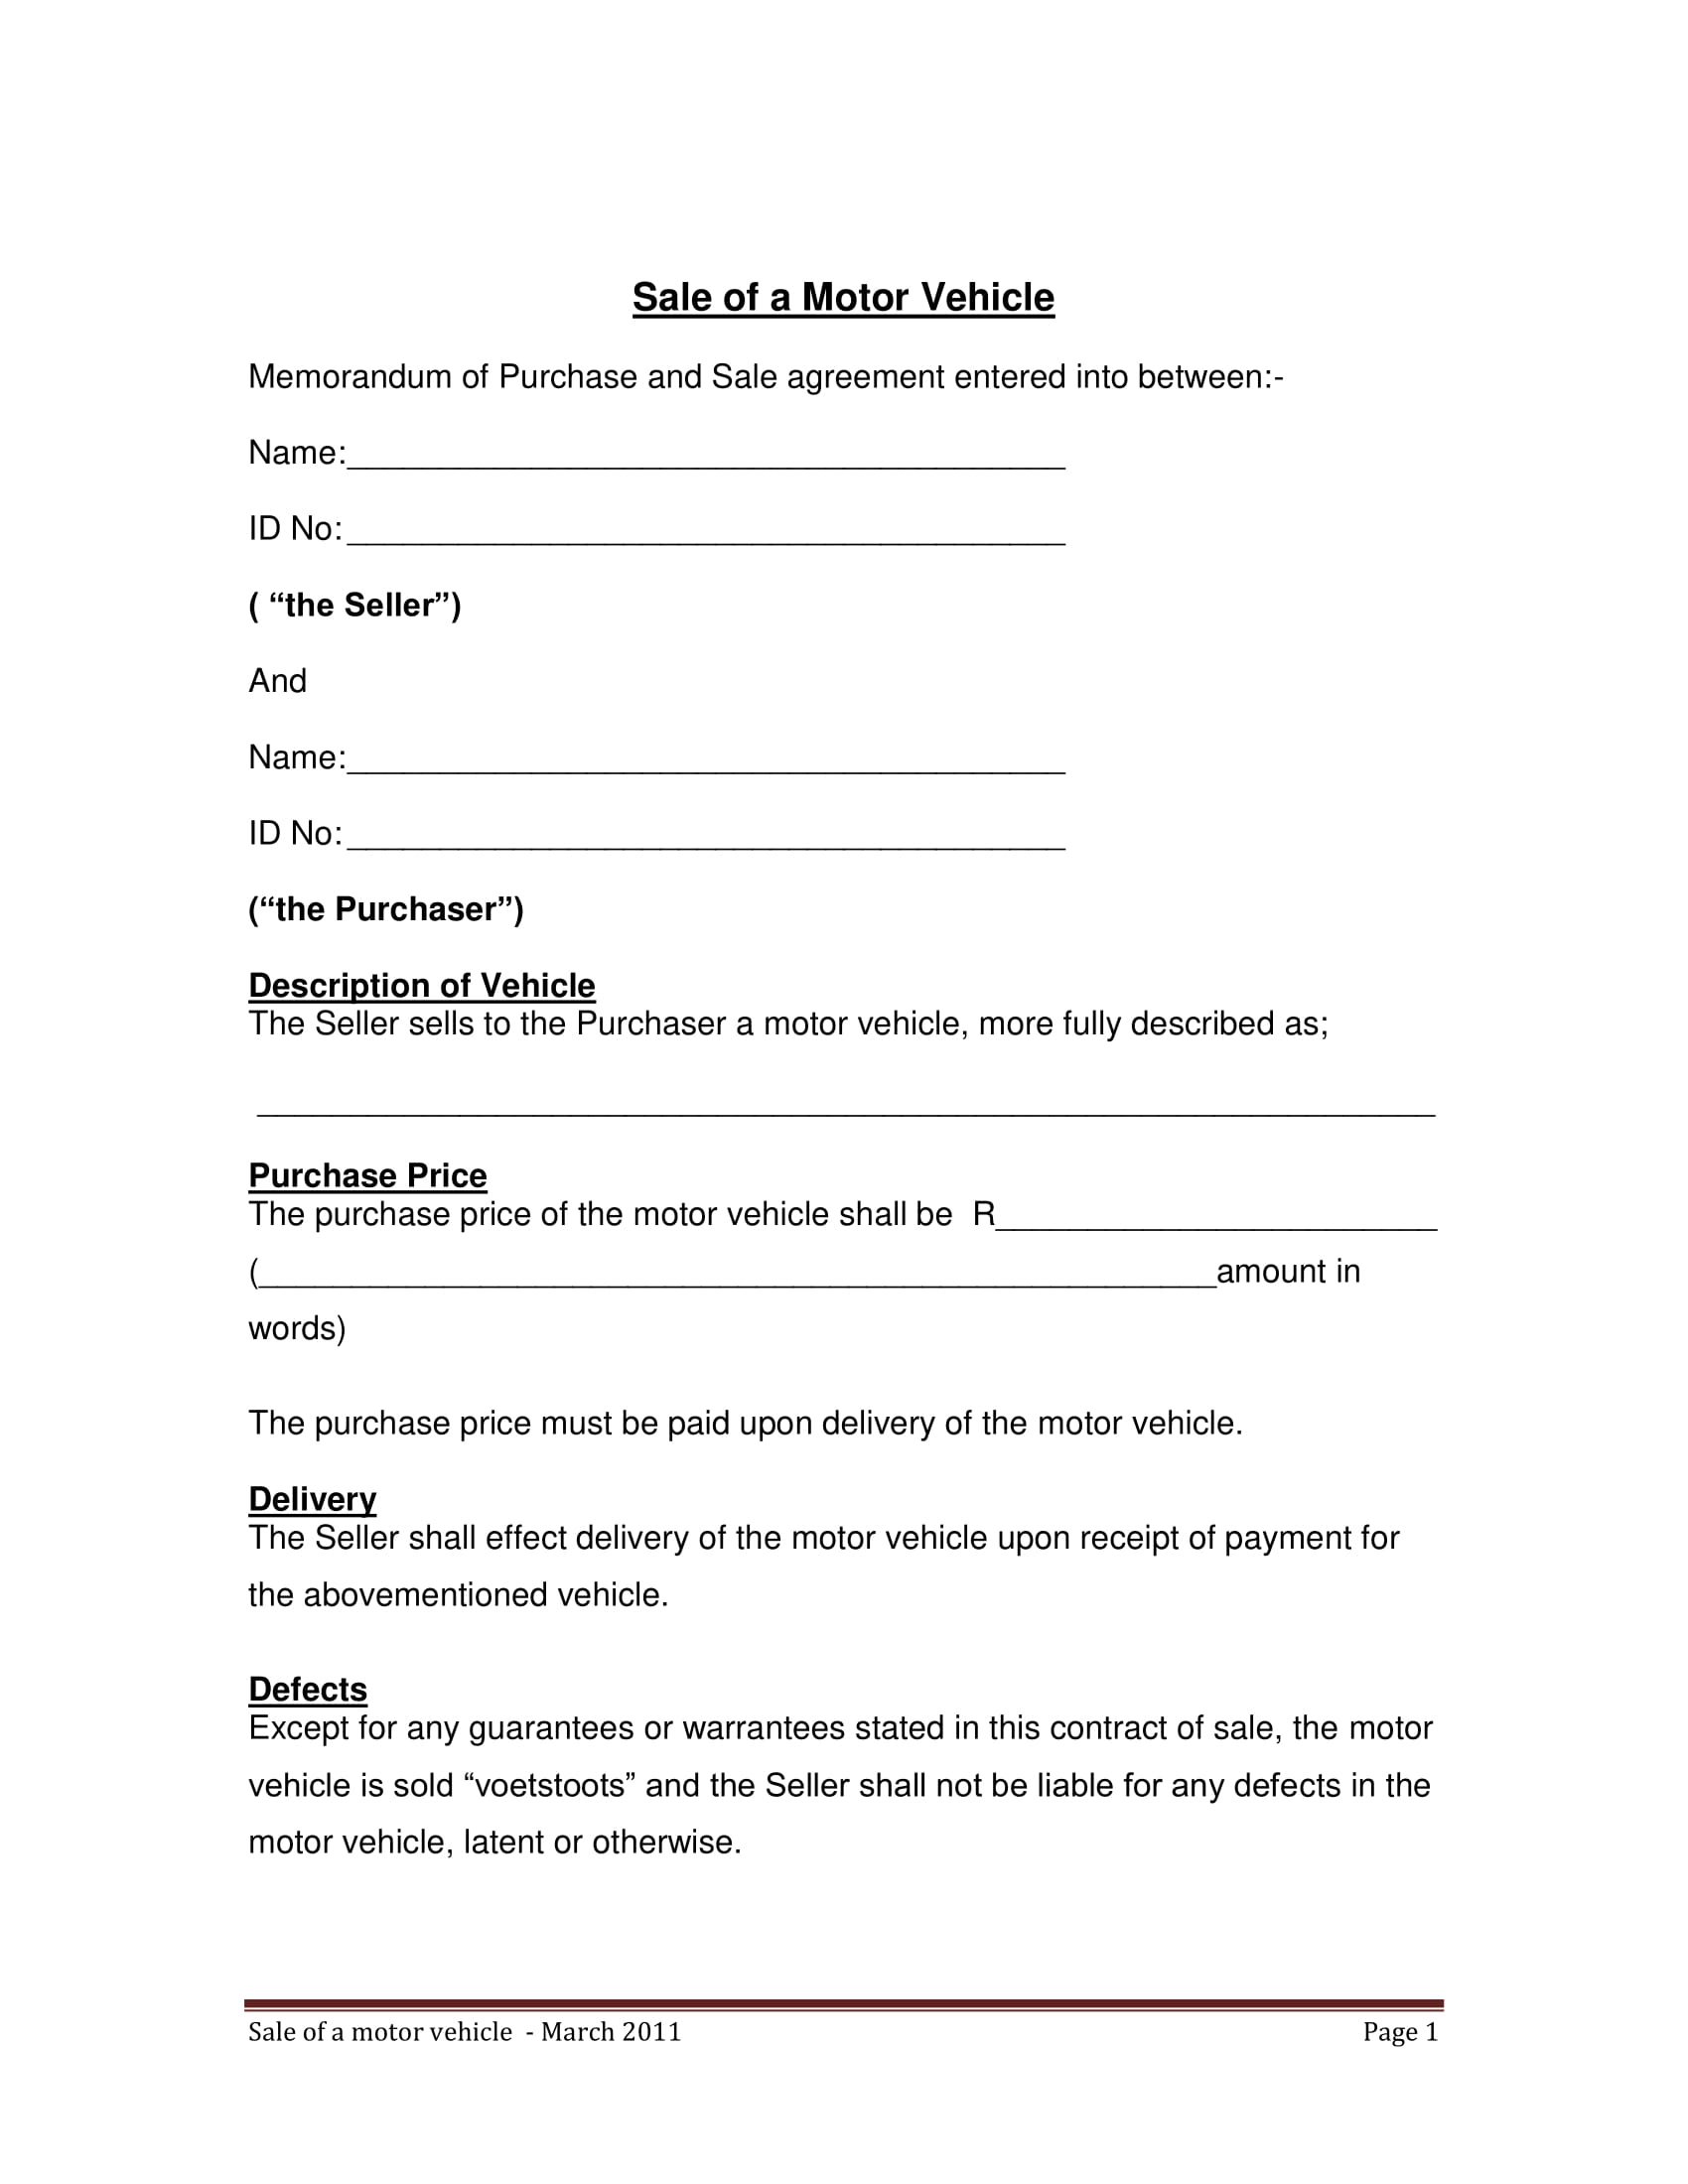 Simple Agreement Contract 3 Vehicle Sales Agreement Contract Forms Pdf